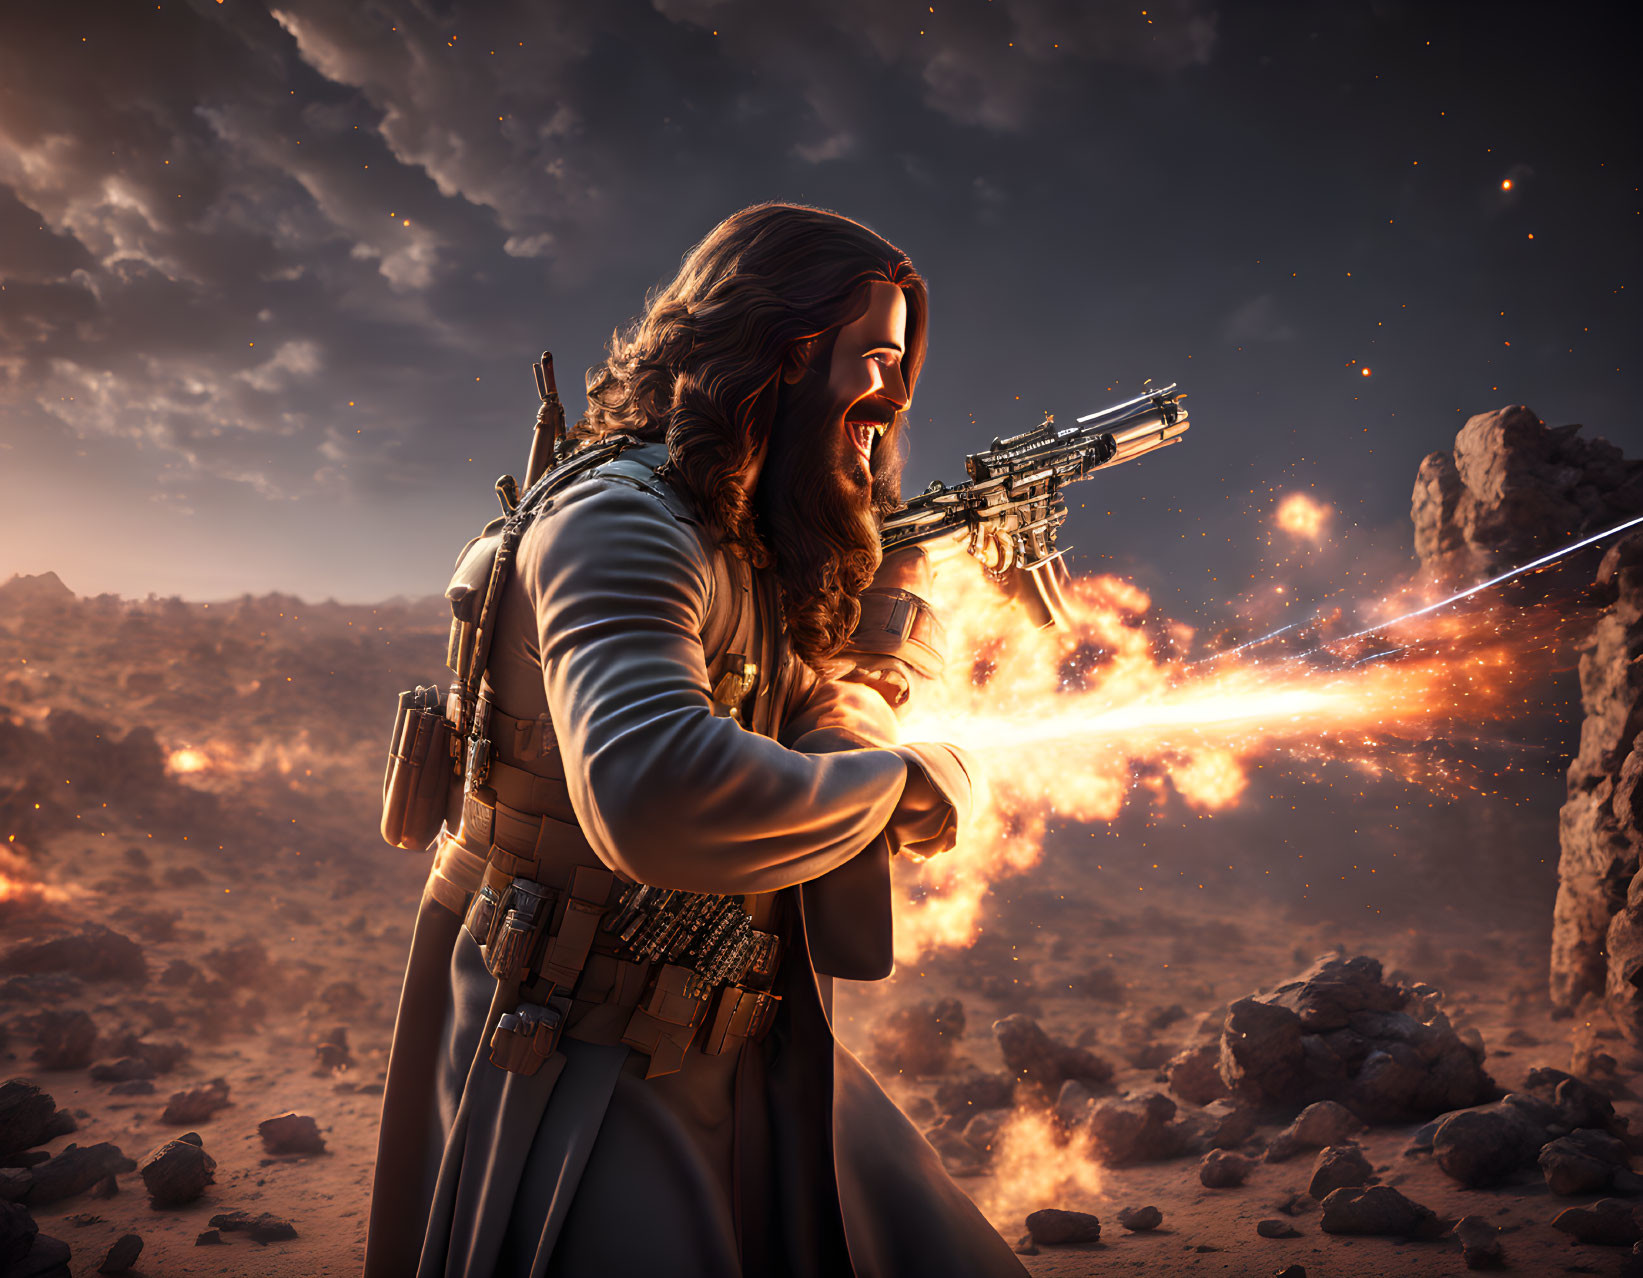 Animated warrior with long hair and beard fires futuristic blaster in fiery battlefield